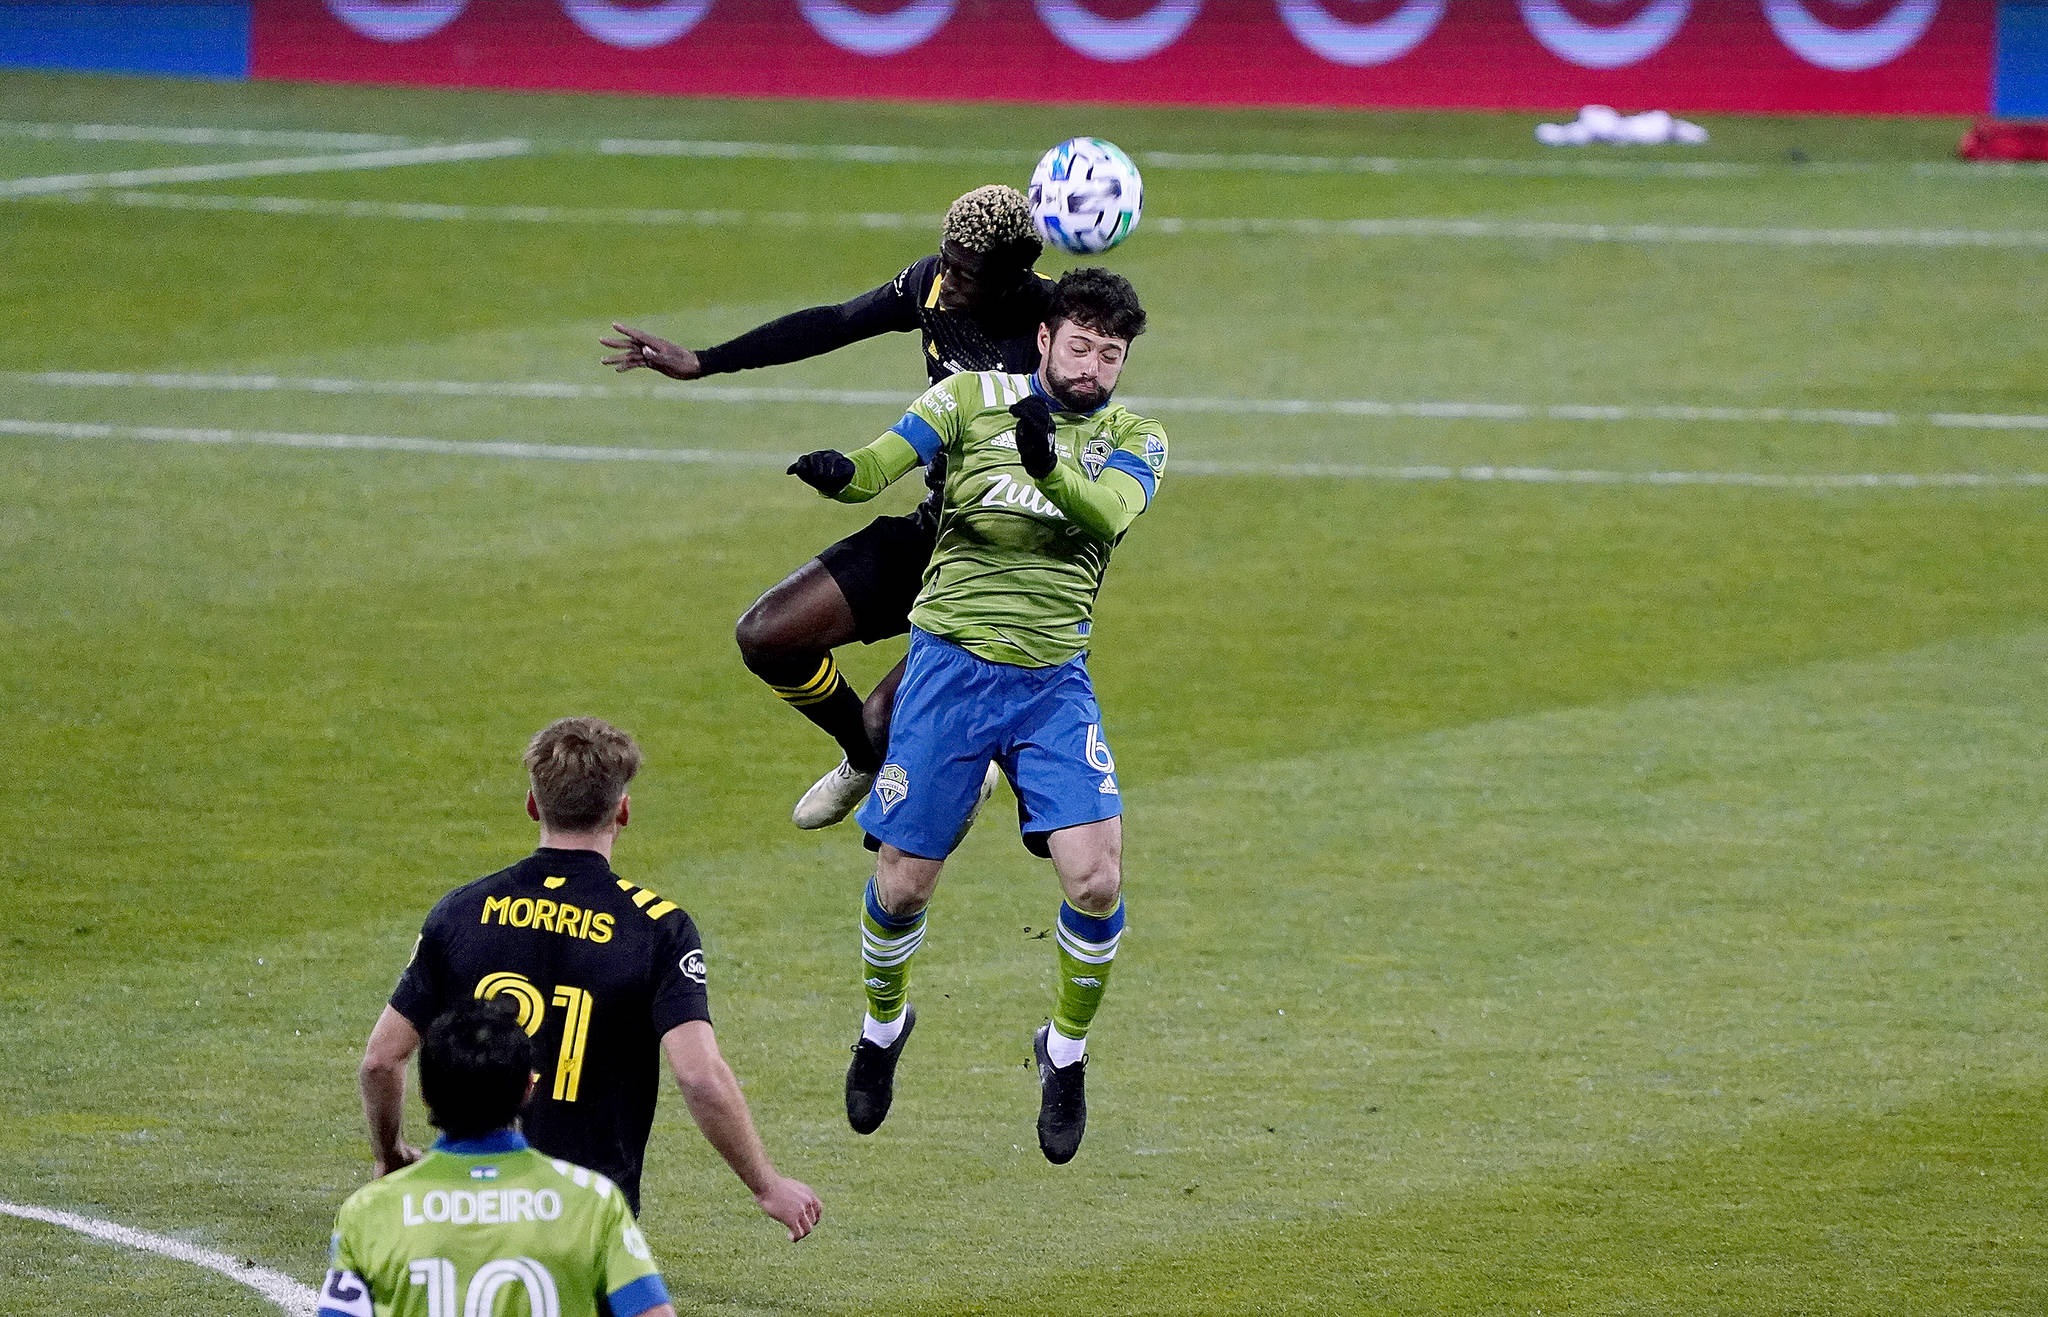 Sounders midfielder João Paulo tries to out-leap a Columbus player for the ball in the MLS Cup. (Mike Fiechtner/Sounders FC Communications)